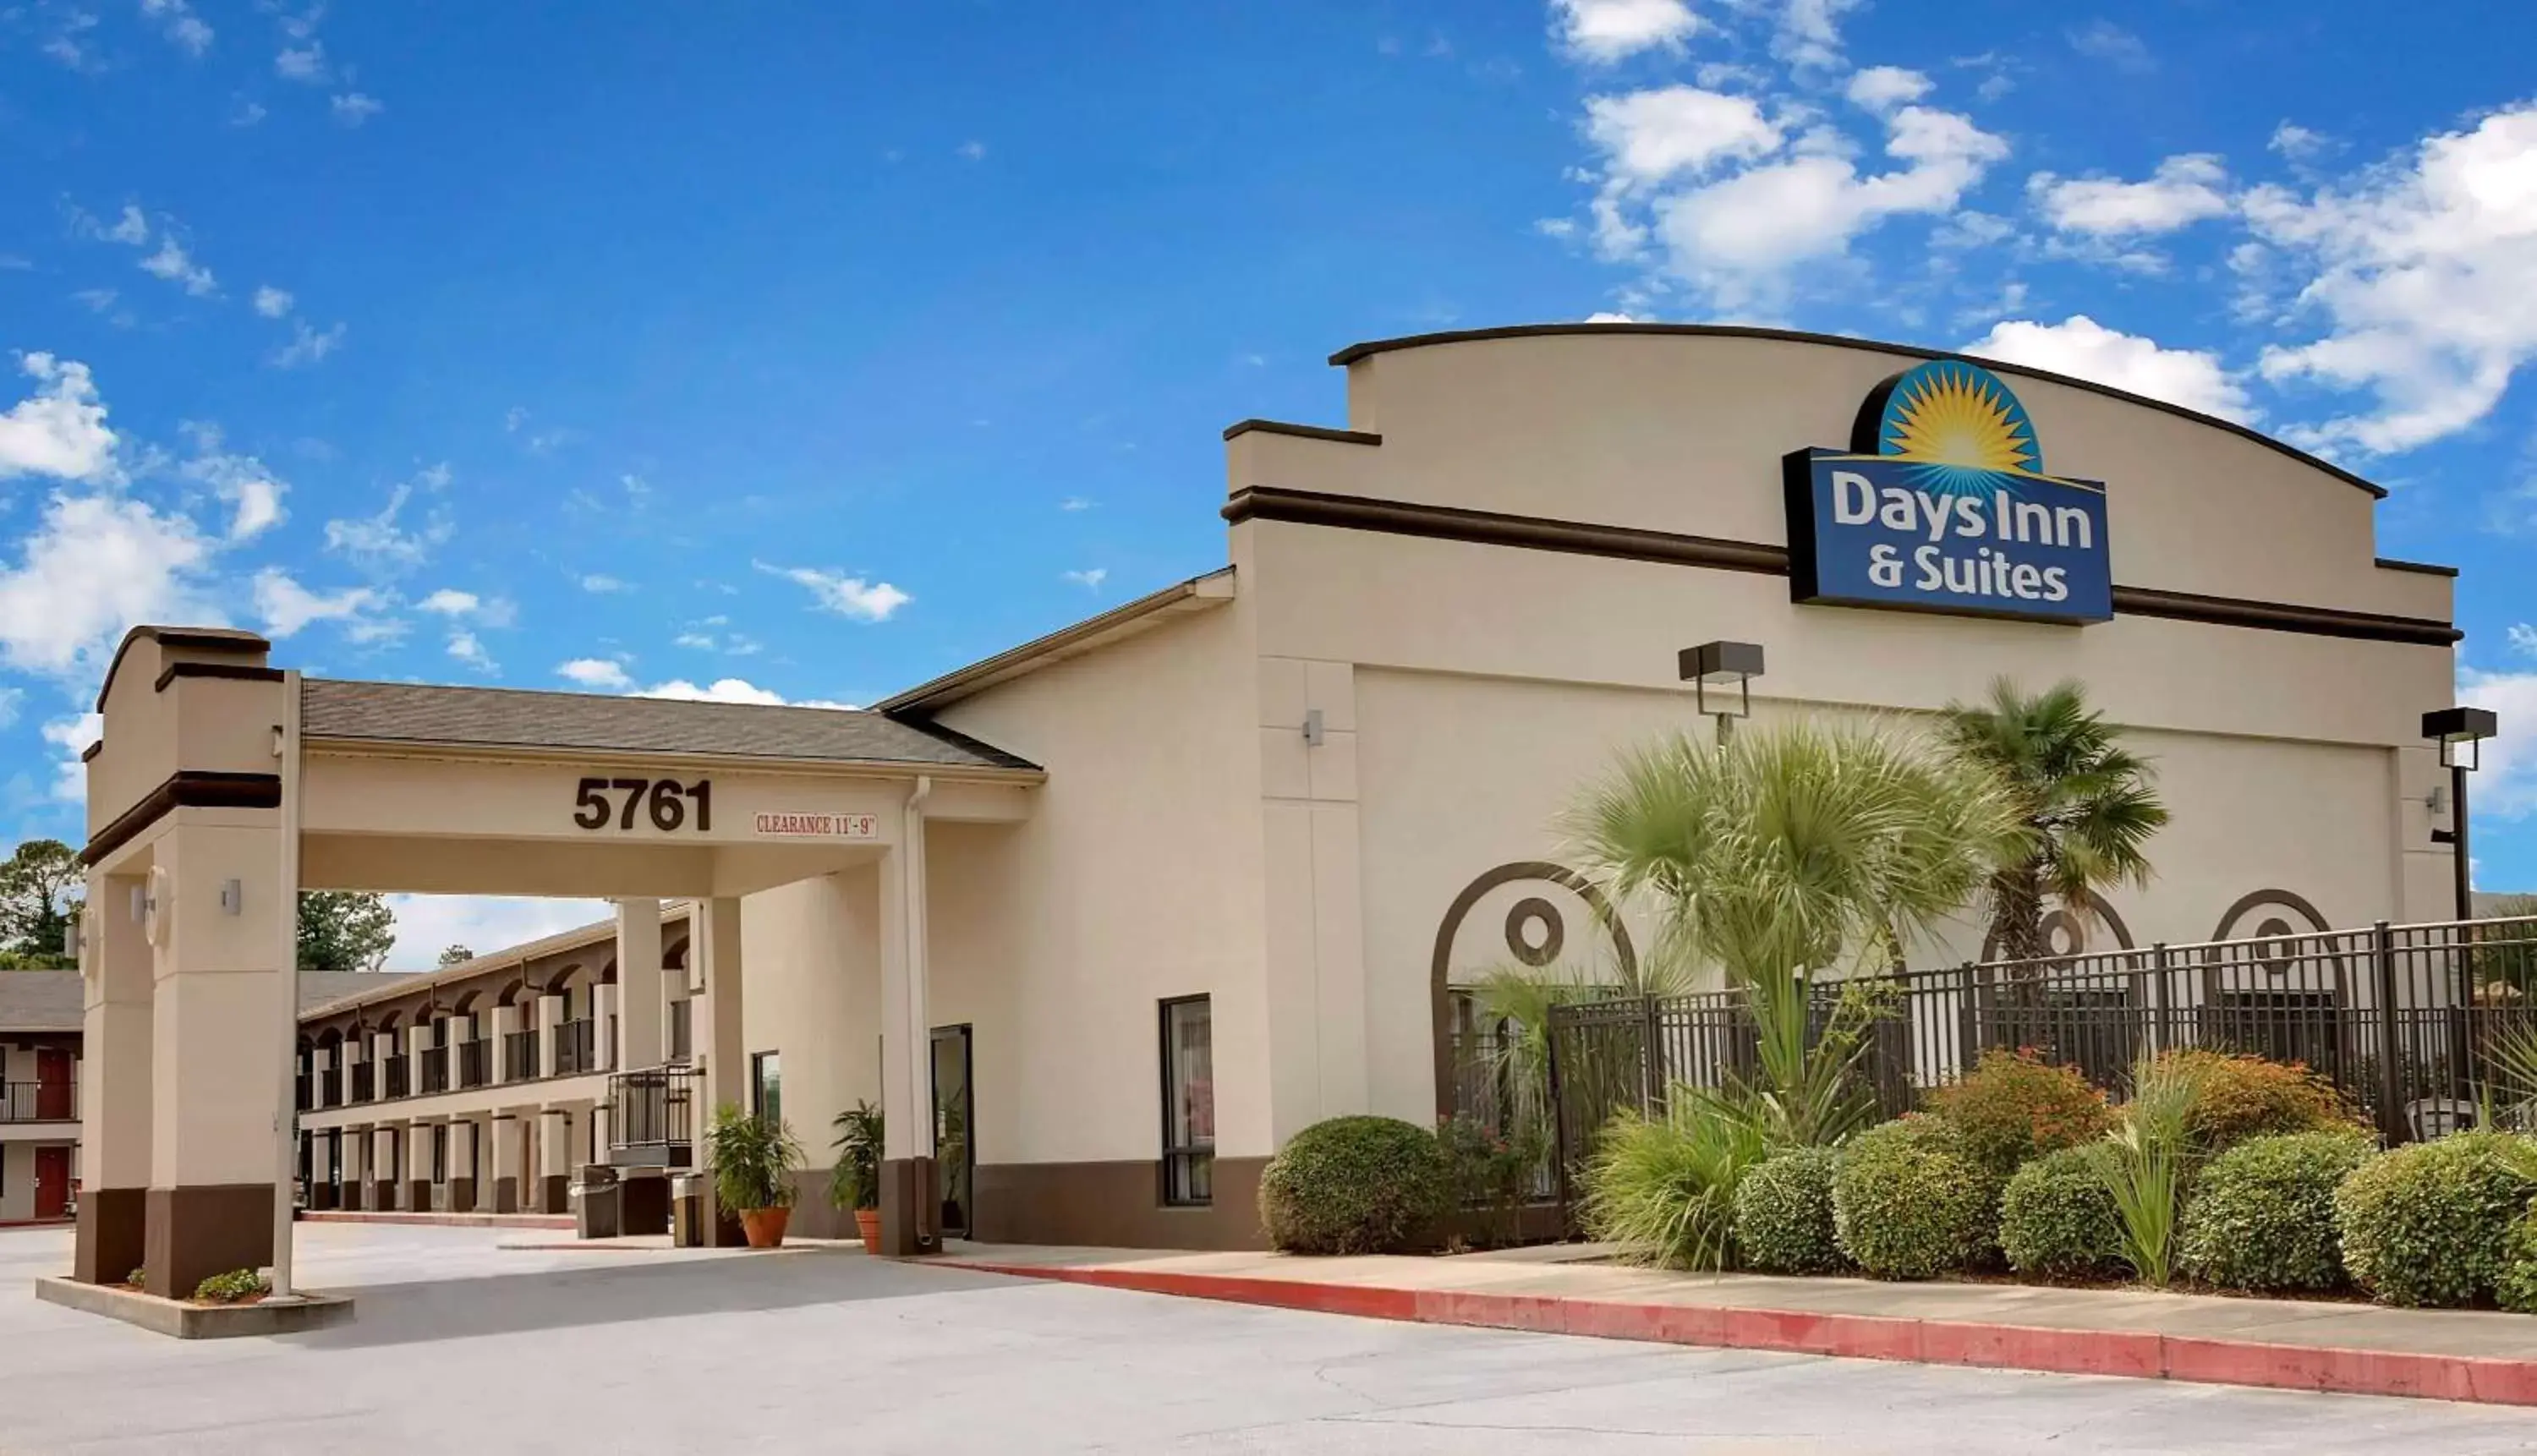 Property Building in Days Inn & Suites by Wyndham Opelousas